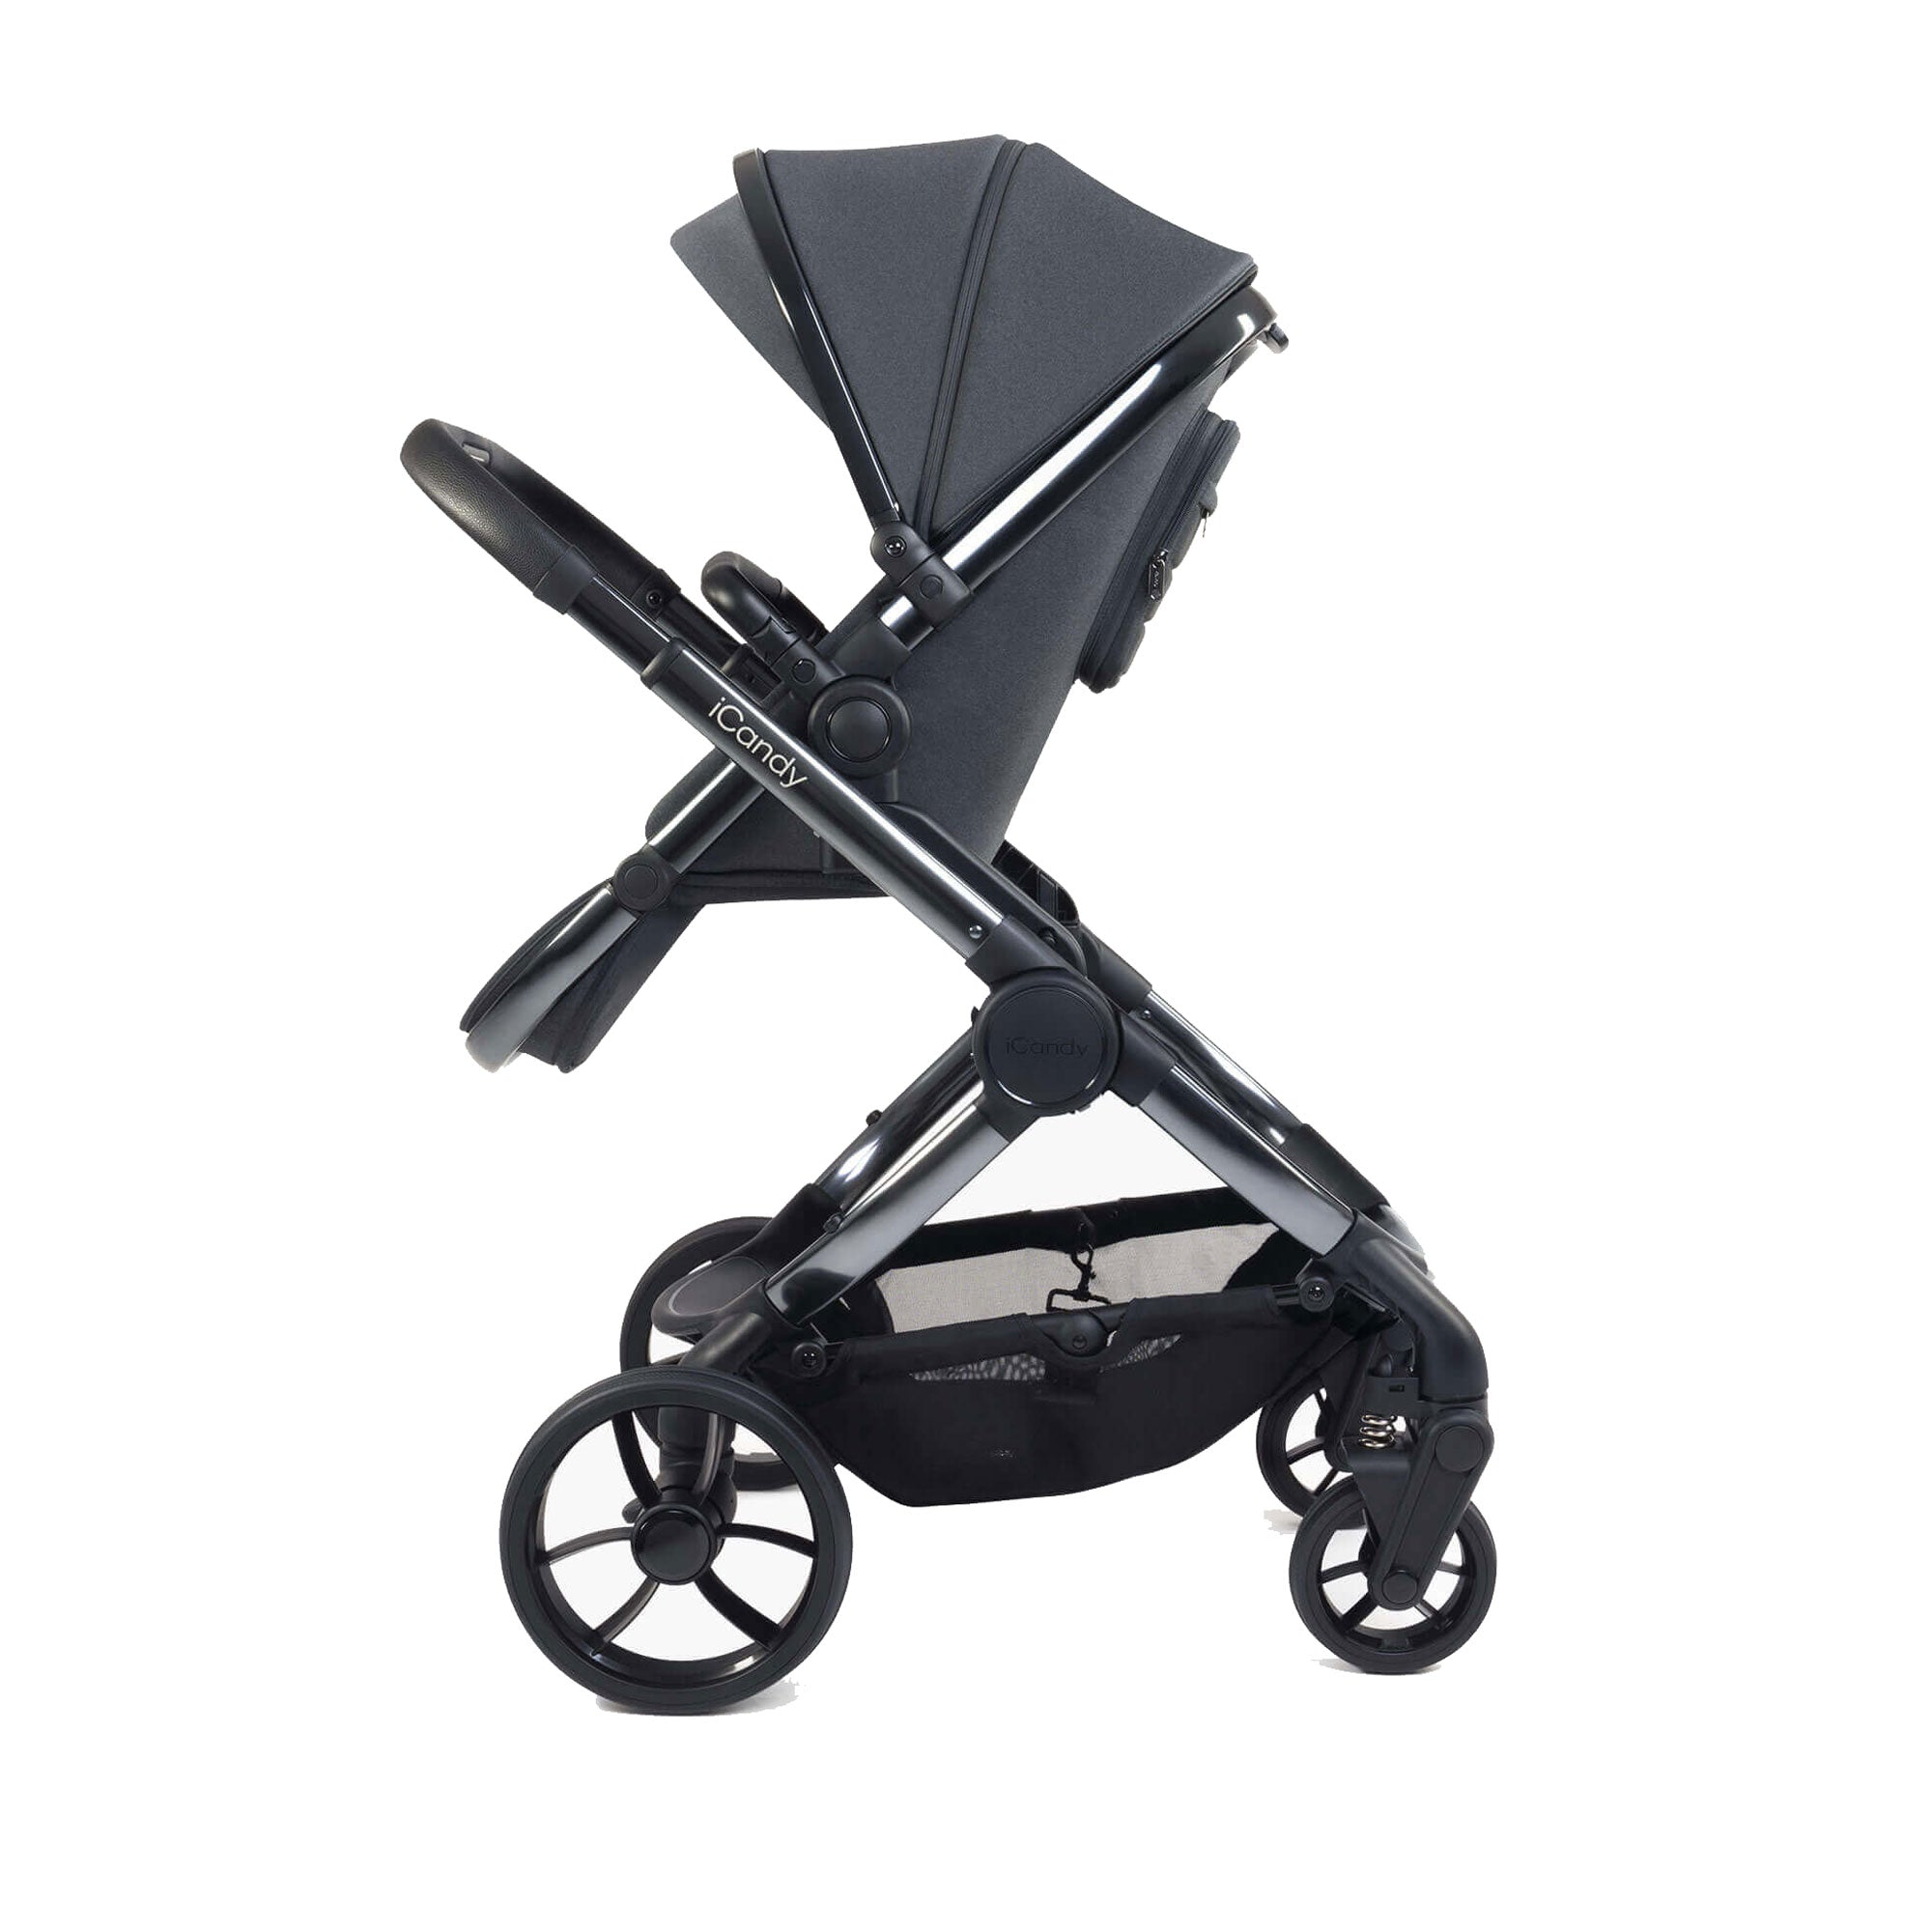 iCandy Peach 7 Complete Bundle with COCOON Car Seat in Dark Grey